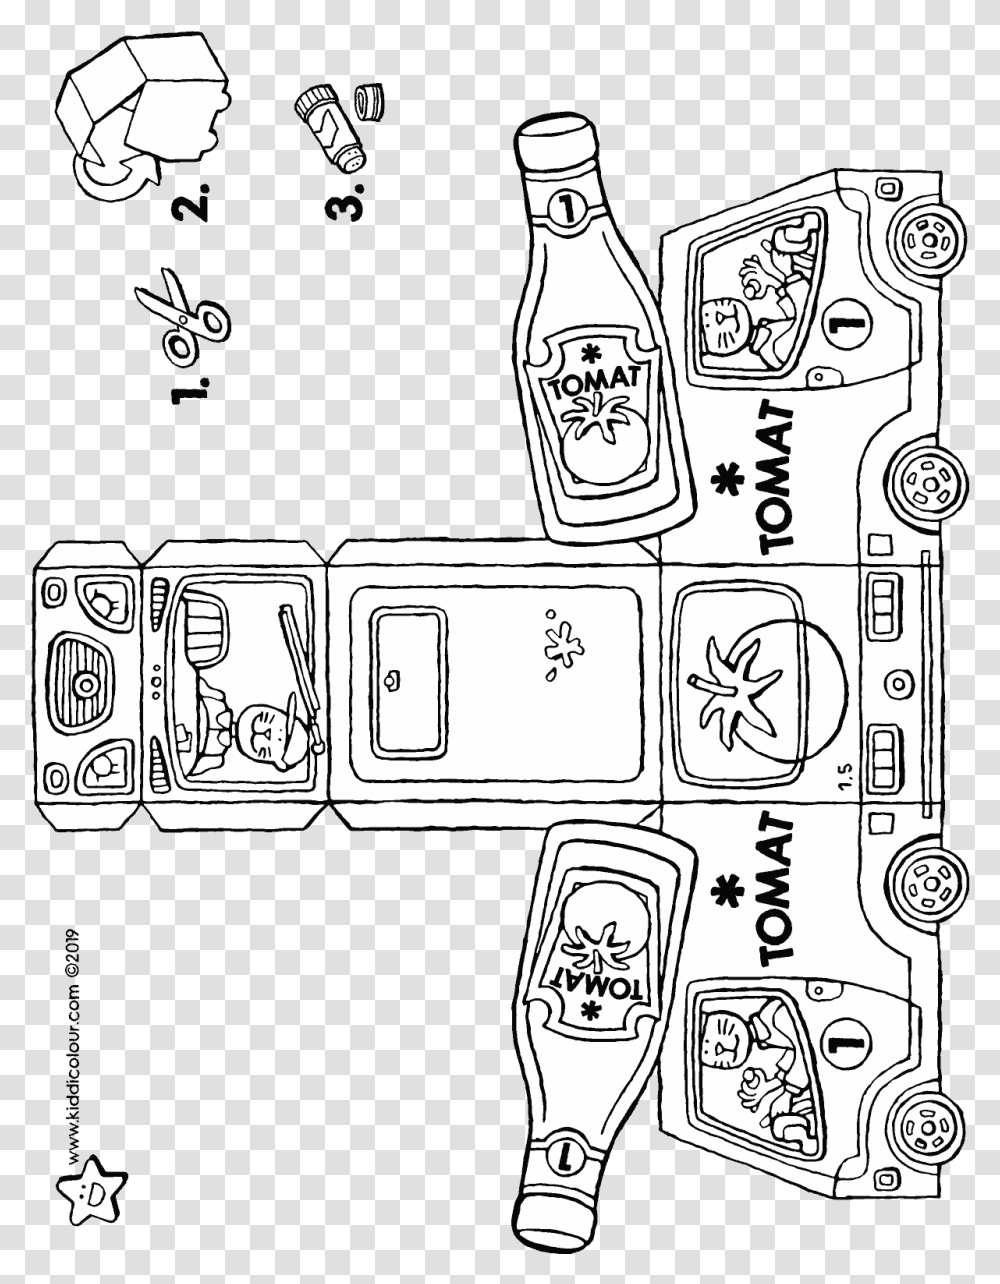 Make Your Own Delivery Van With Ketchup Bottle Colouring Line Art, Beverage, Drink, Alcohol, Mobile Phone Transparent Png